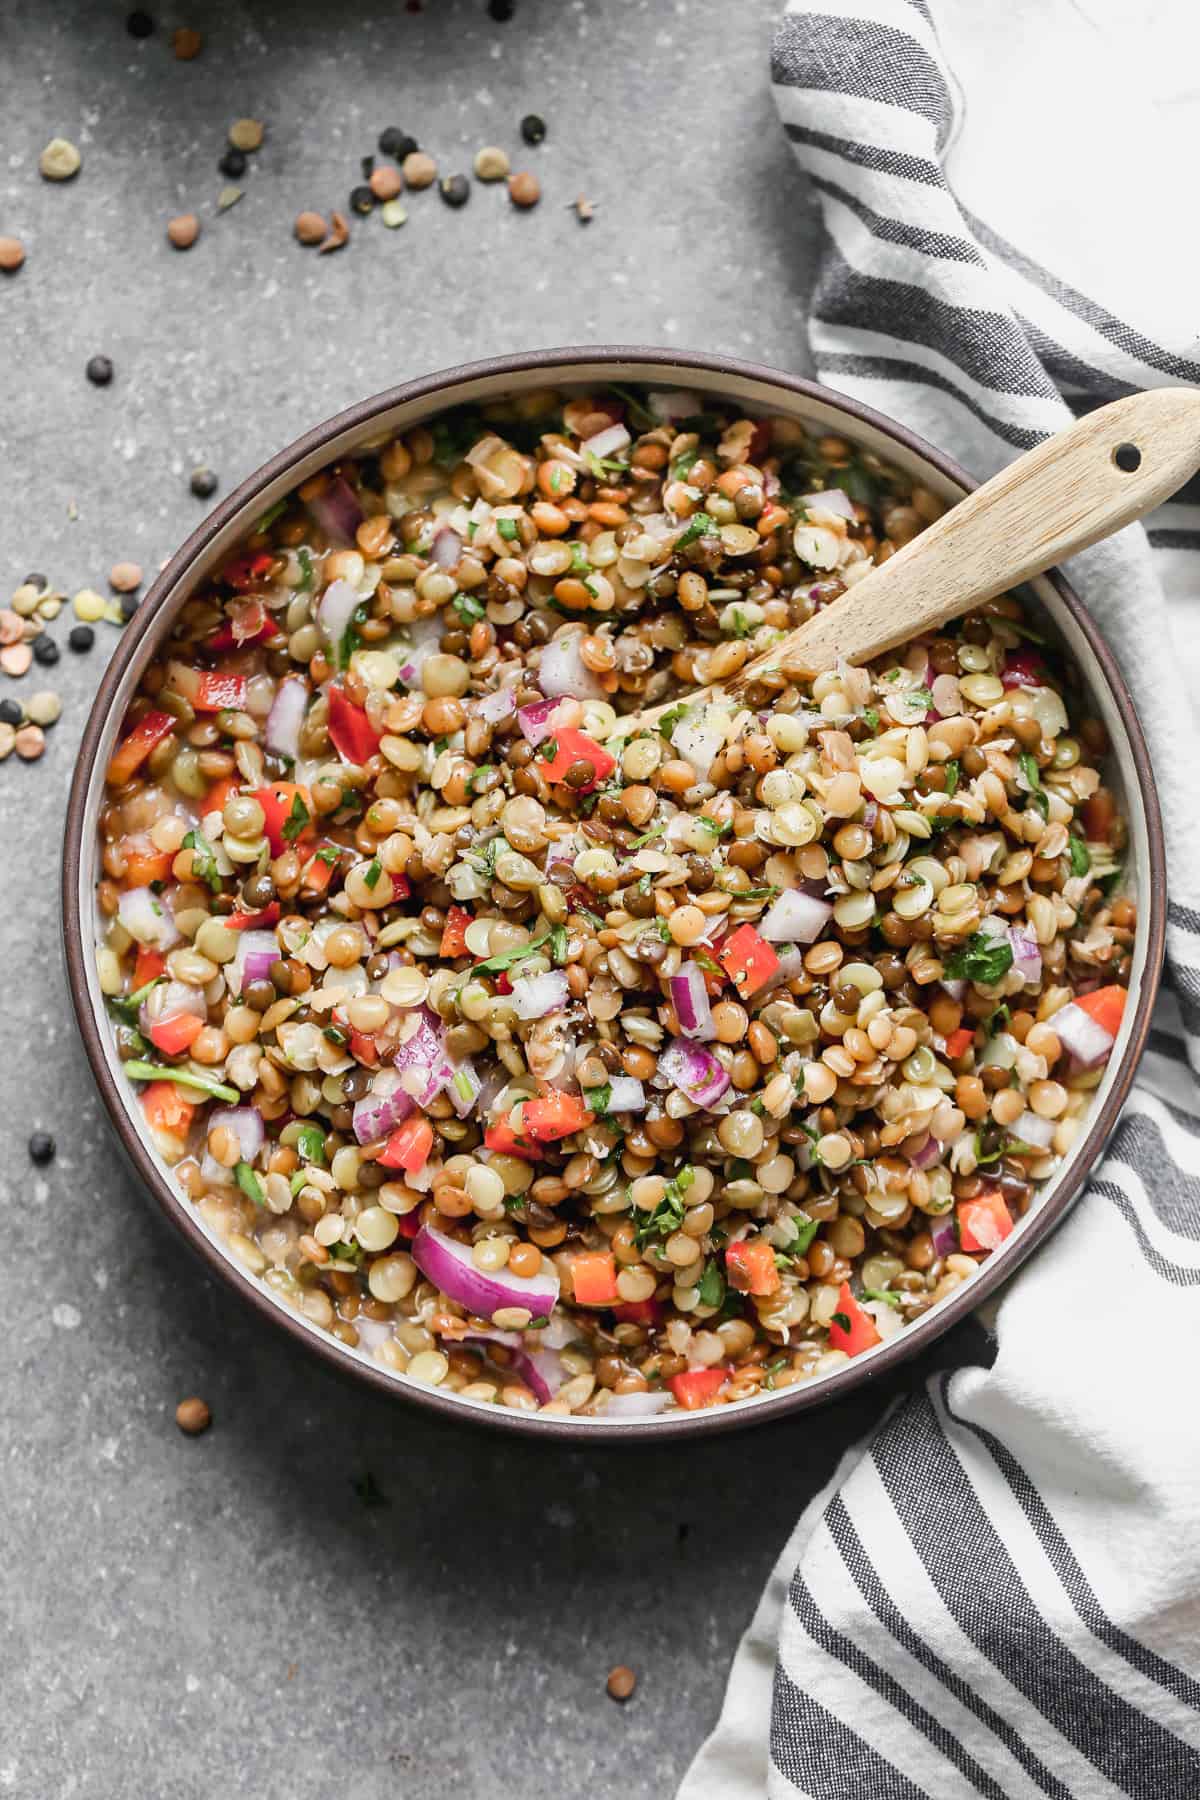 A large bowl filled with Lentil Salad and some fresh chopped vegetables.